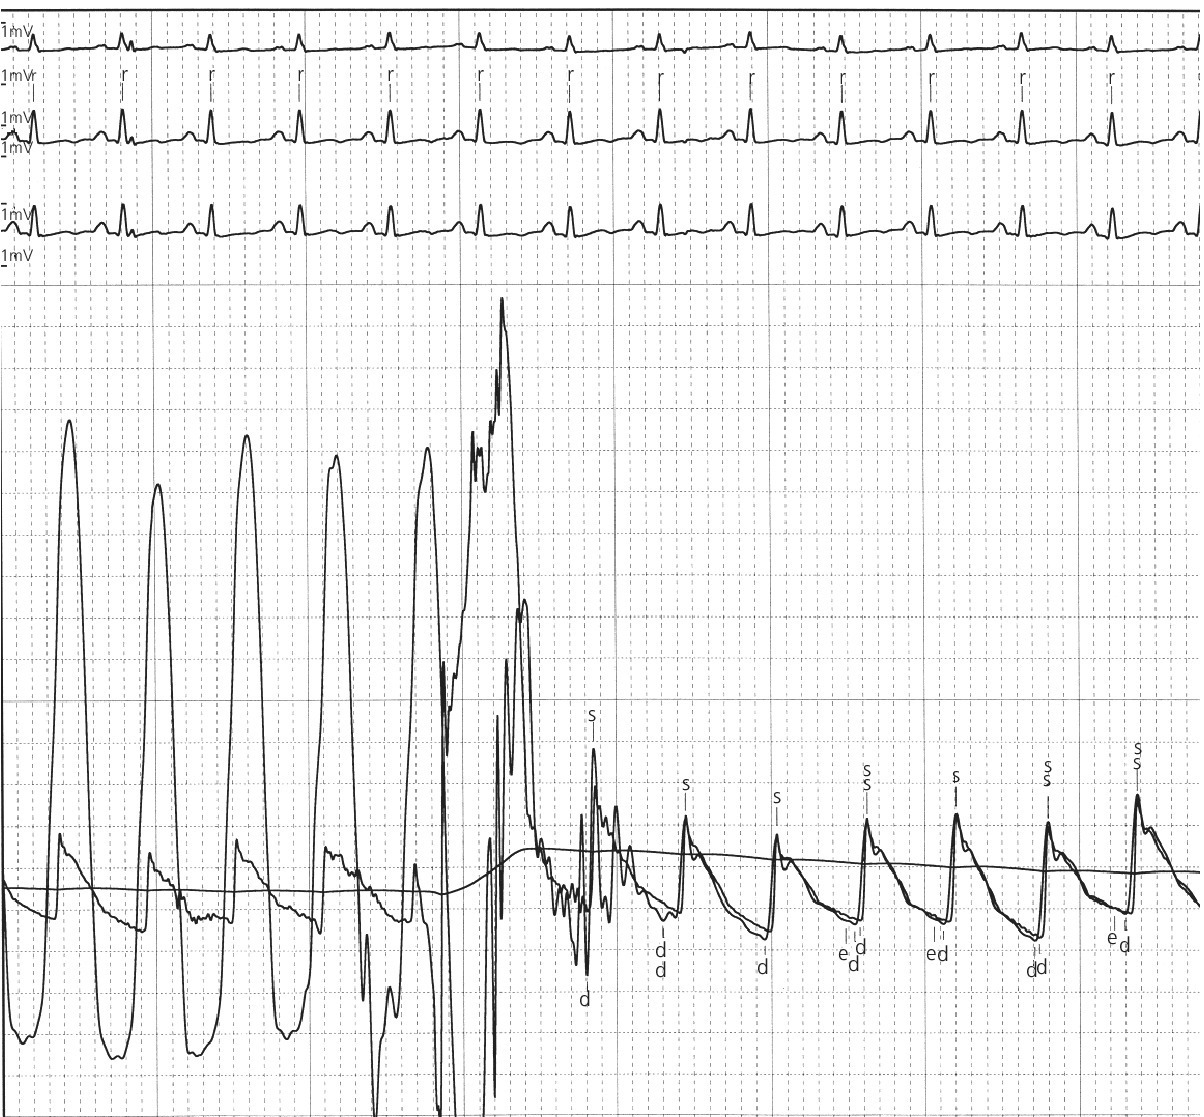 ECG displaying waveform for LV to aortic pullback using a dual lumen end‐hole catheter during amyl nitrate administration.